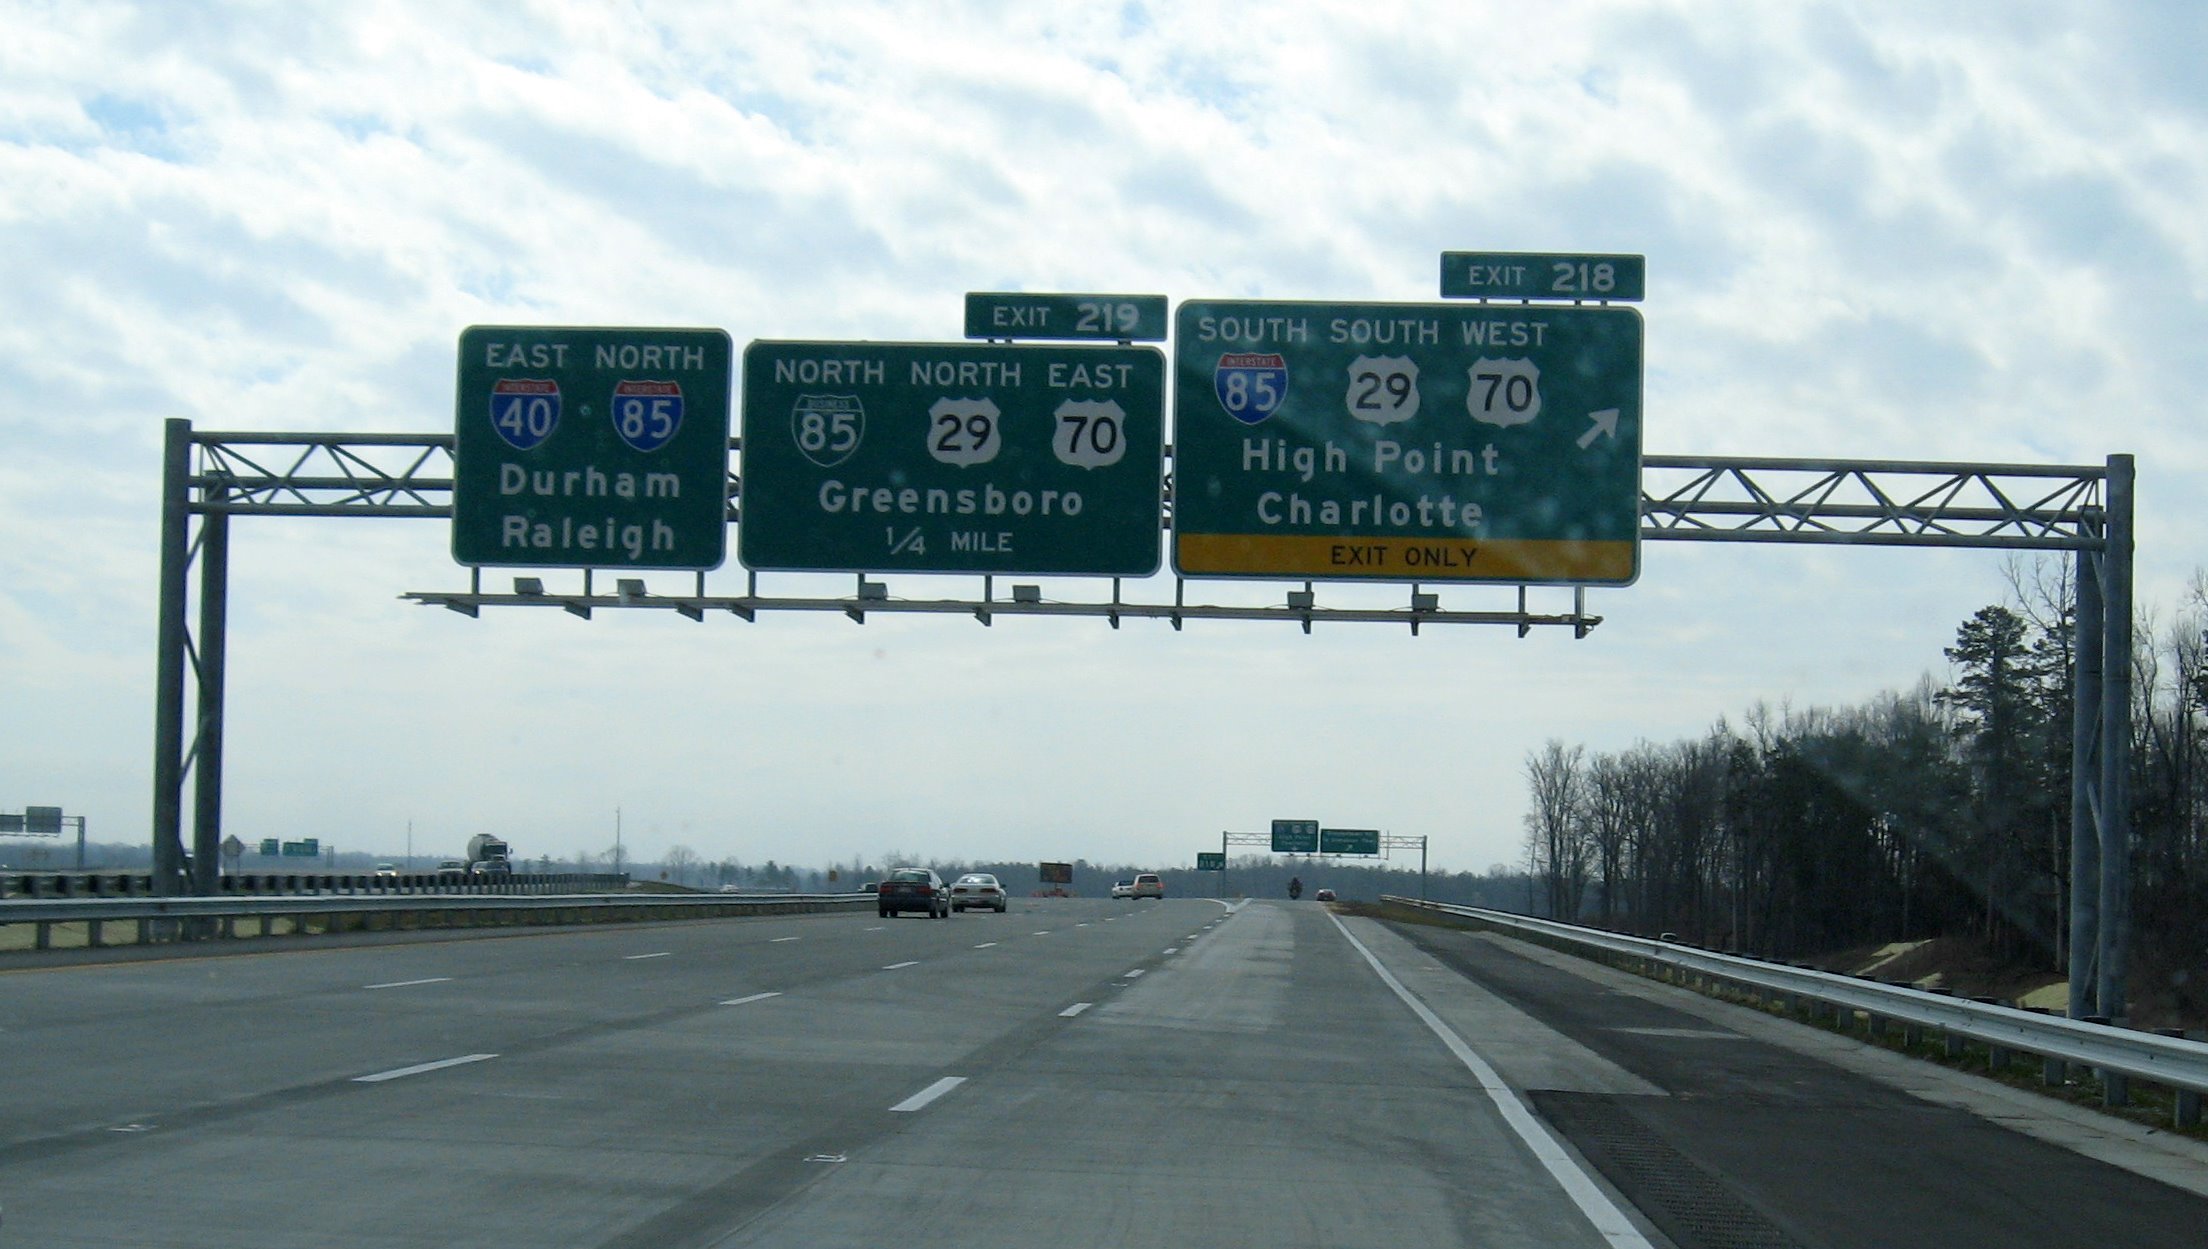 Photo of exit signage approaching Business 85 South exit on I-73 Greensboro Loop
in June 2009